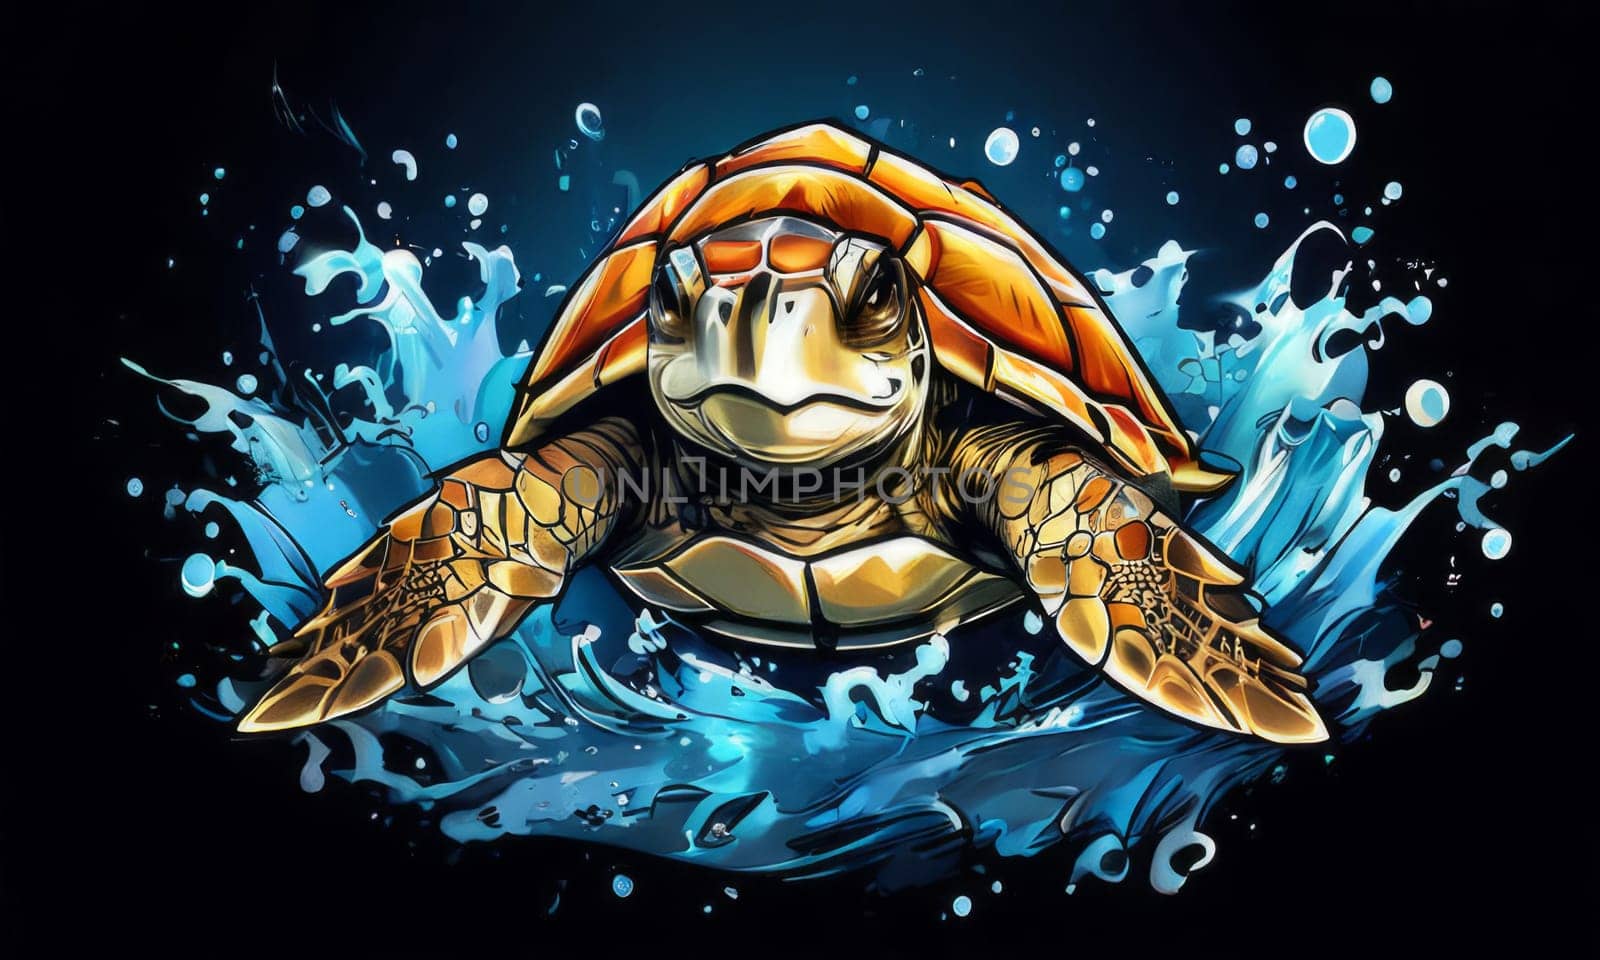 Turtle gracefully swimming in water surrounded by bubbles, showcasing its serene underwater world. For Tshirt design, posters, postcards, other merchandise with marine theme, childrens books